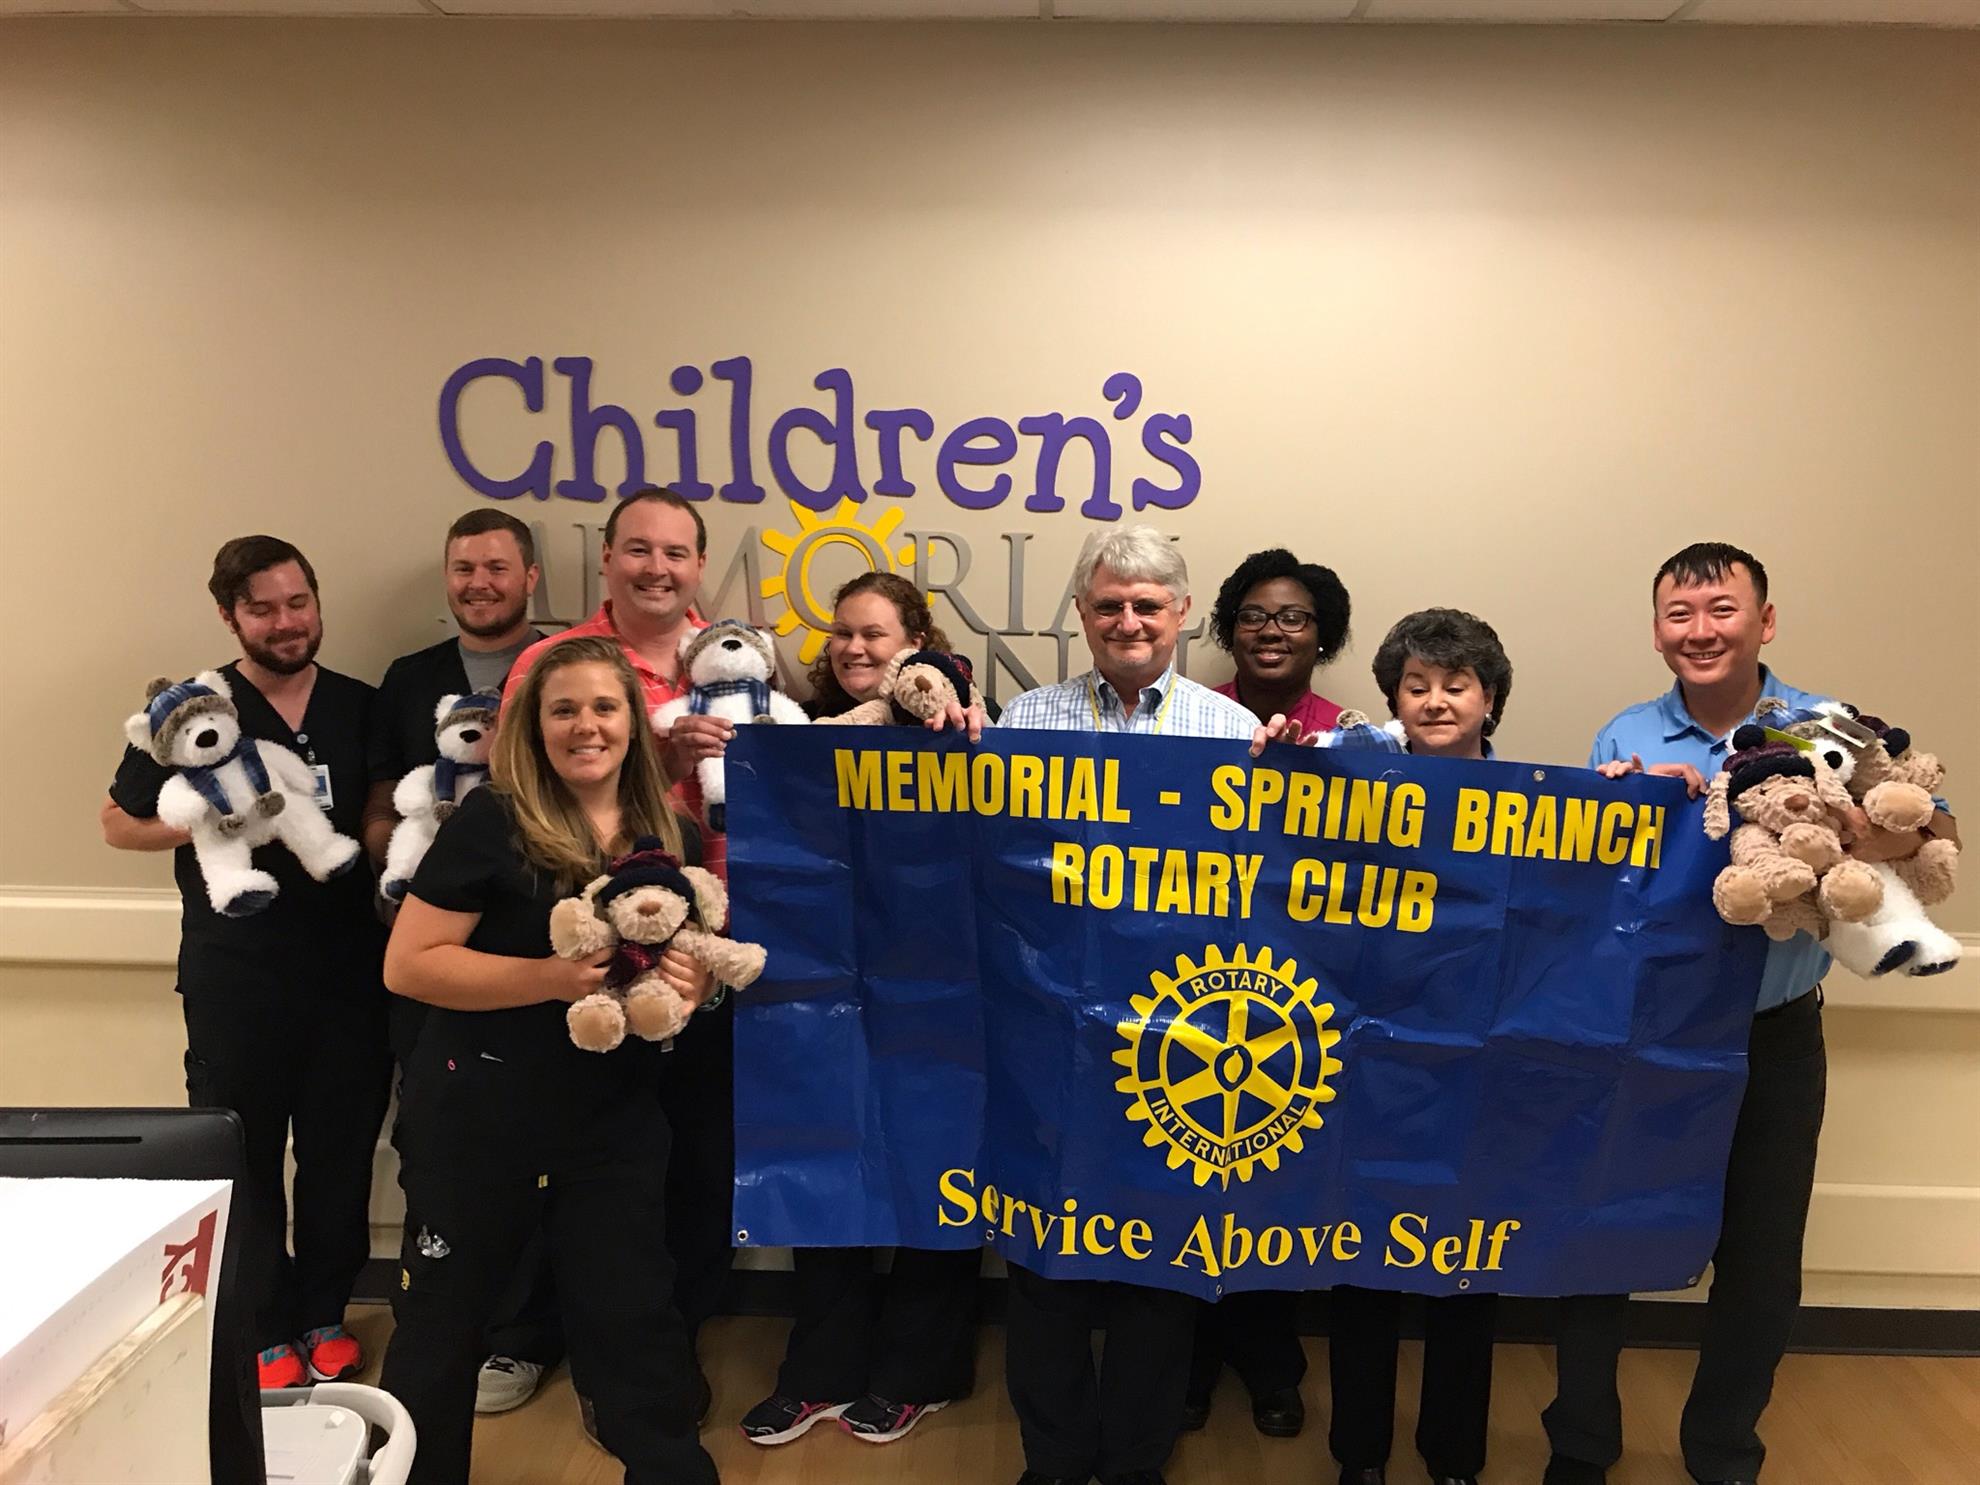 MSB Donates to St Jude and Delivers Bears to Children Rotary Club of